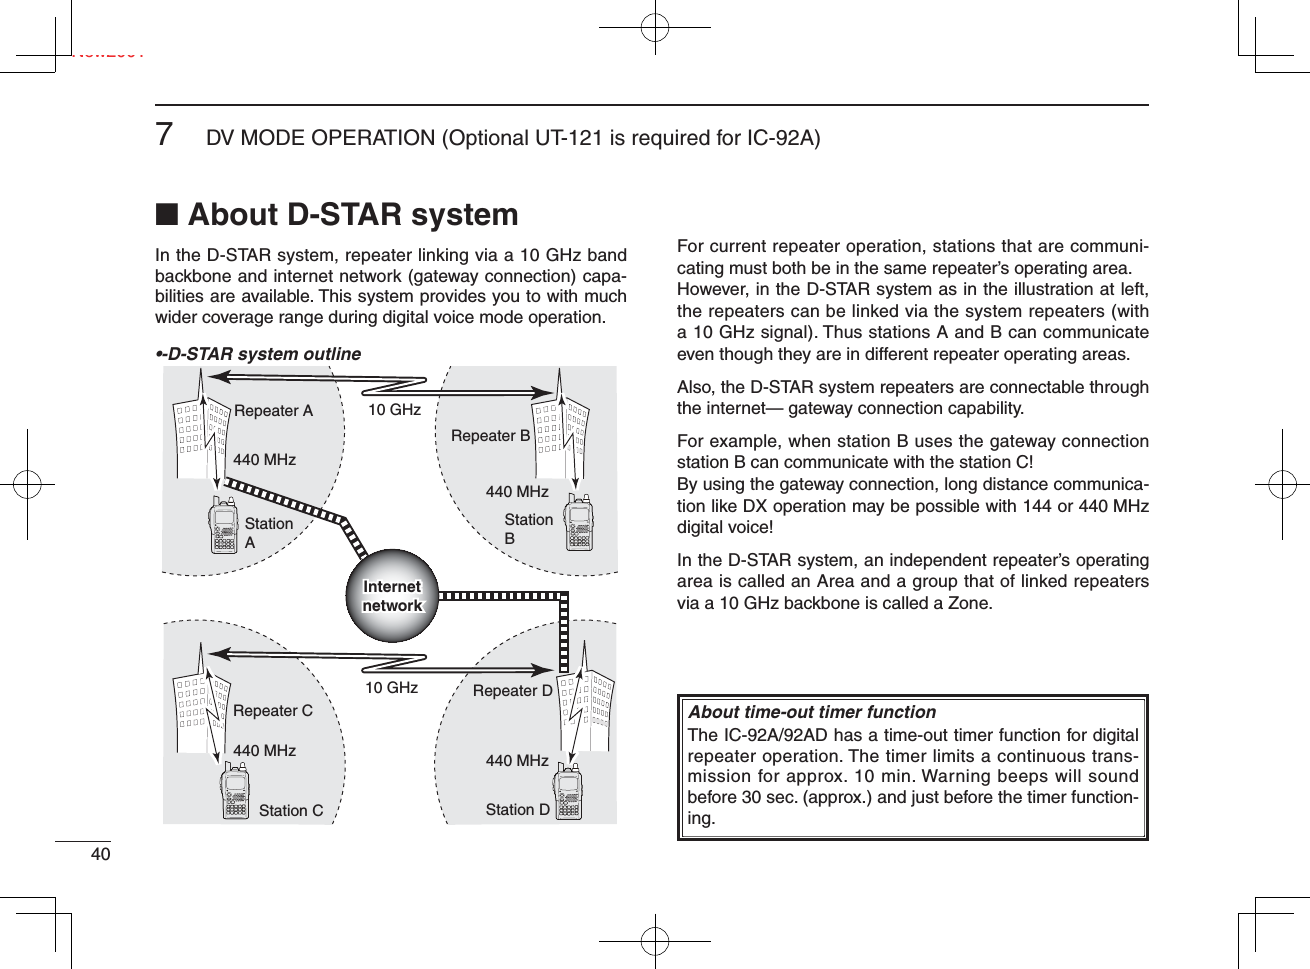 Ne407DV MODE OPERATION (Optional UT-121 is required for IC-92A)New2001■ About D-STAR systemIn the D-STAR system, repeater linking via a 10 GHz band backbone and internet network (gateway connection) capa-bilities are available. This system provides you to with much wider coverage range during digital voice mode operation.•-D-STAR system outlineFor current repeater operation, stations that are communi-cating must both be in the same repeater’s operating area.However, in the D-STAR system as in the illustration at left, the repeaters can be linked via the system repeaters (with a 10 GHz signal). Thus stations A and B can communicate even though they are in different repeater operating areas.Also, the D-STAR system repeaters are connectable through the internet— gateway connection capability. For example, when station B uses the gateway connection station B can communicate with the station C! By using the gateway connection, long distance communica-tion like DX operation may be possible with 144 or 440 MHz digital voice!In the D-STAR system, an independent repeater’s operating area is called an Area and a group that of linked repeaters via a 10 GHz backbone is called a Zone.About time-out timer functionThe IC-92A/92AD has a time-out timer function for digital repeater operation. The timer limits a continuous trans-mission for approx. 10 min. Warning beeps will sound before 30 sec. (approx.) and just before the timer function-ing.StationAStation C  Station DRepeater ARepeater D440 MHz440 MHzRepeater C10 GHzStationBRepeater B10 GHz440 MHz440 MHzInternetnetworkInternetnetwork